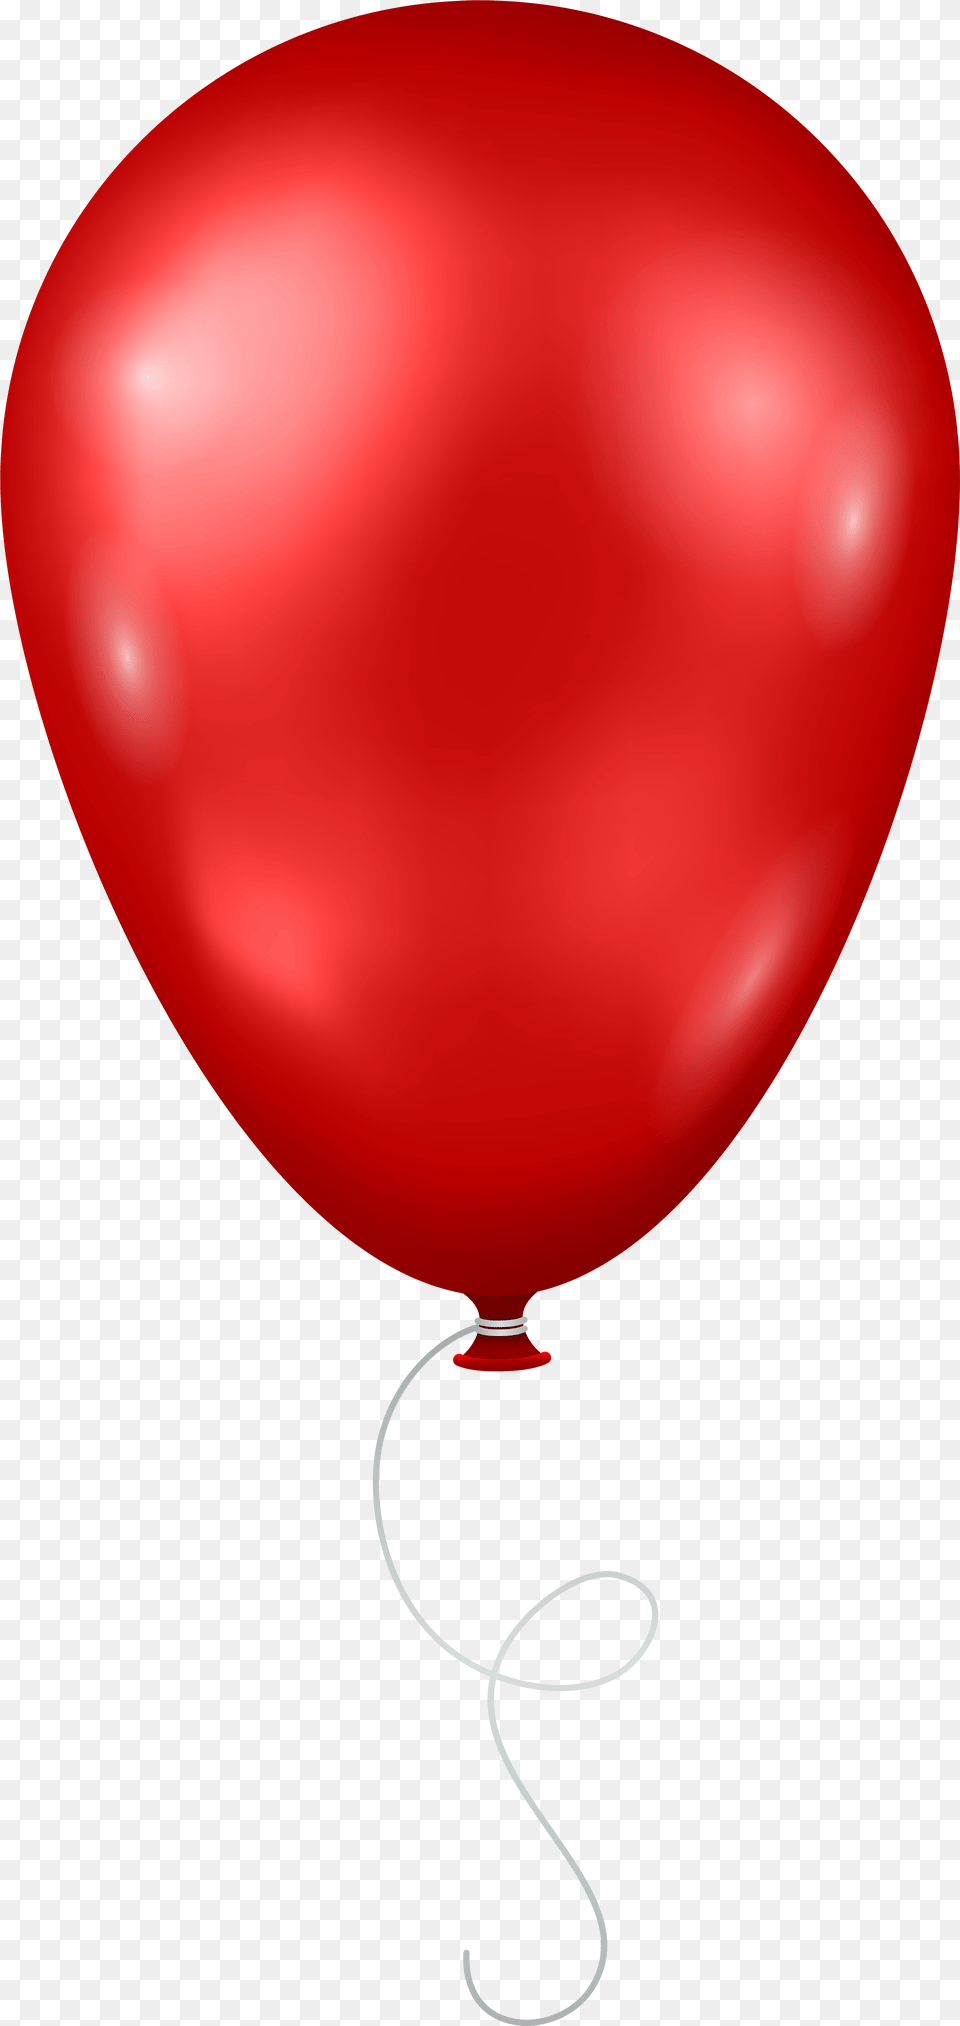 Red Balloon Background Free Transparent Png